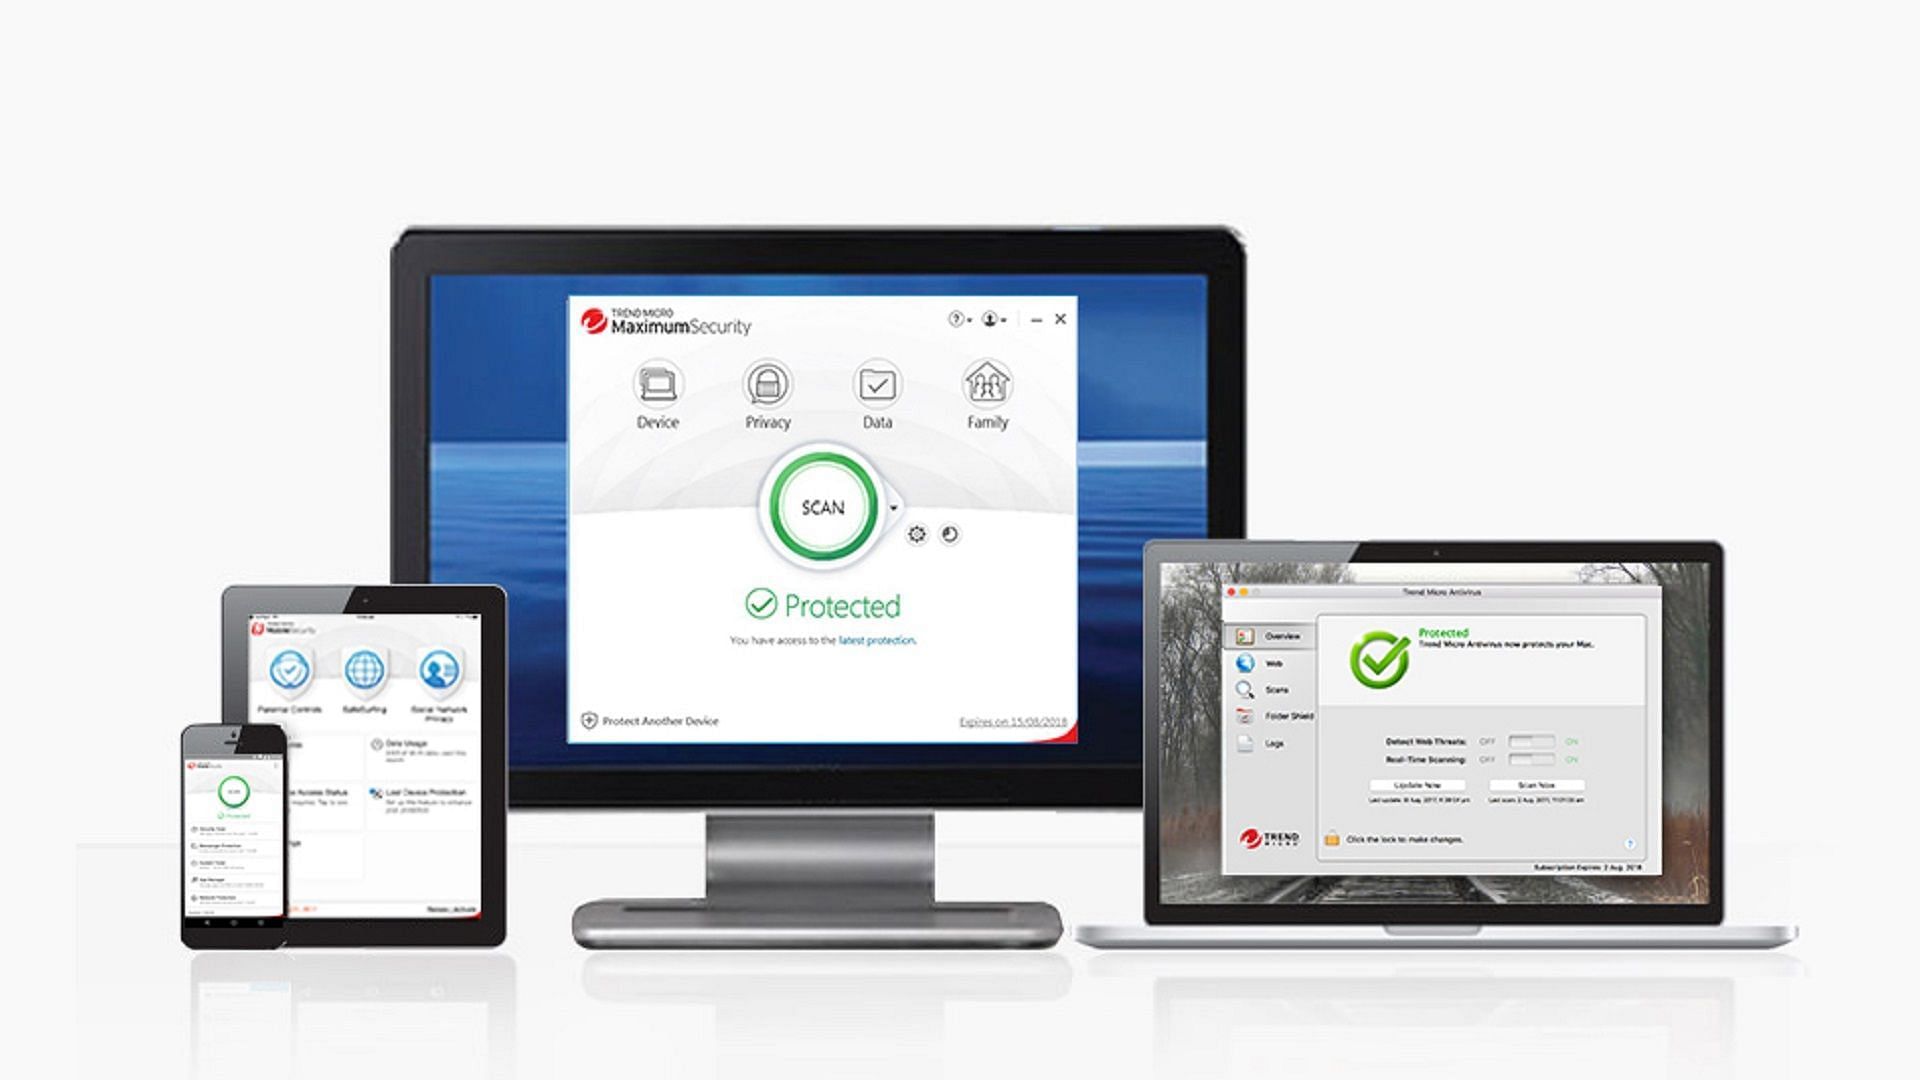 Trend Micro Antivirus software running on multiple devices (Image via Trend Micro)